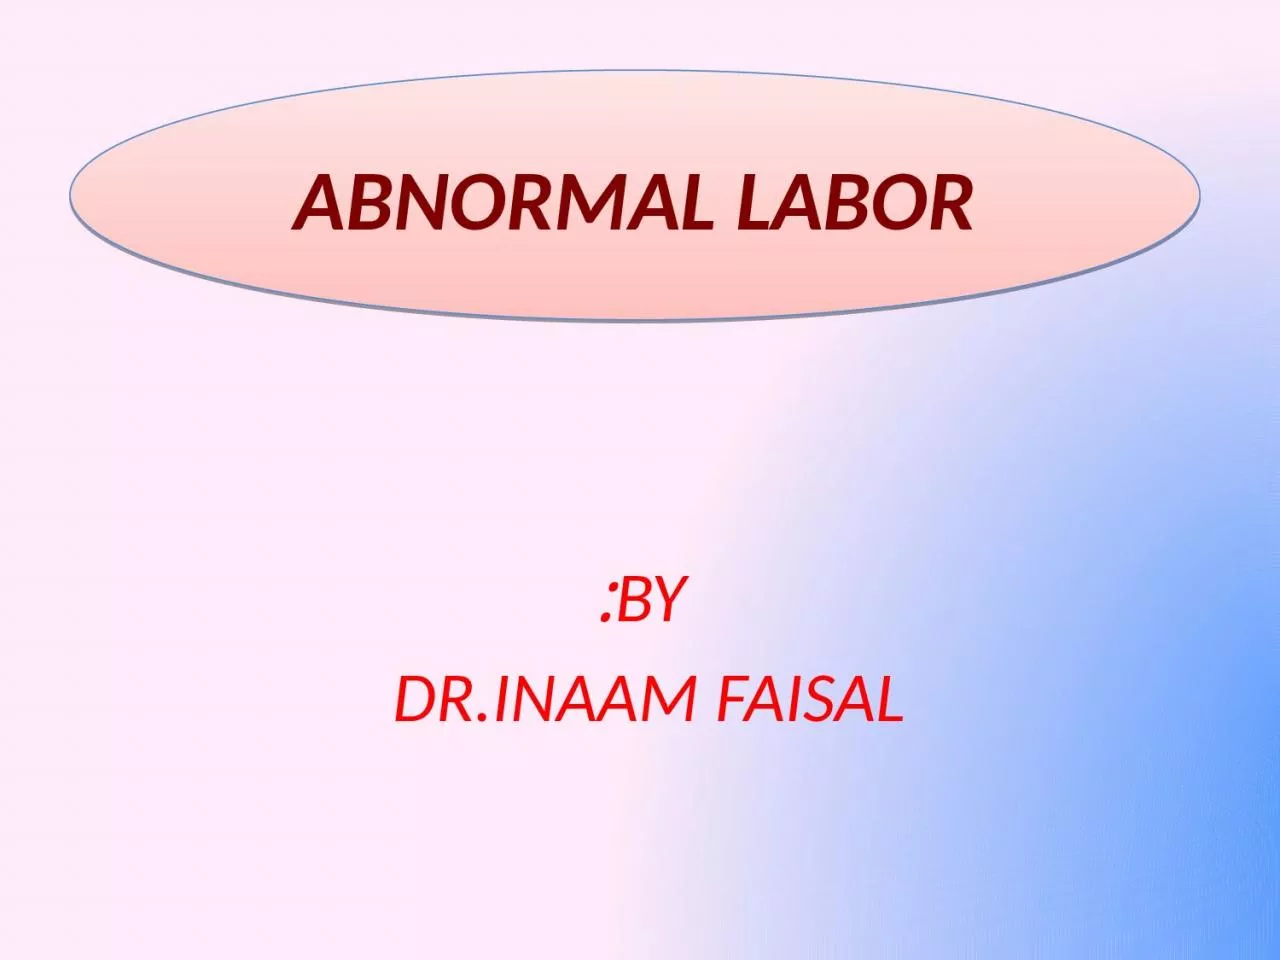 By: Dr.Inaam Faisal  ABNORMAL LABOR